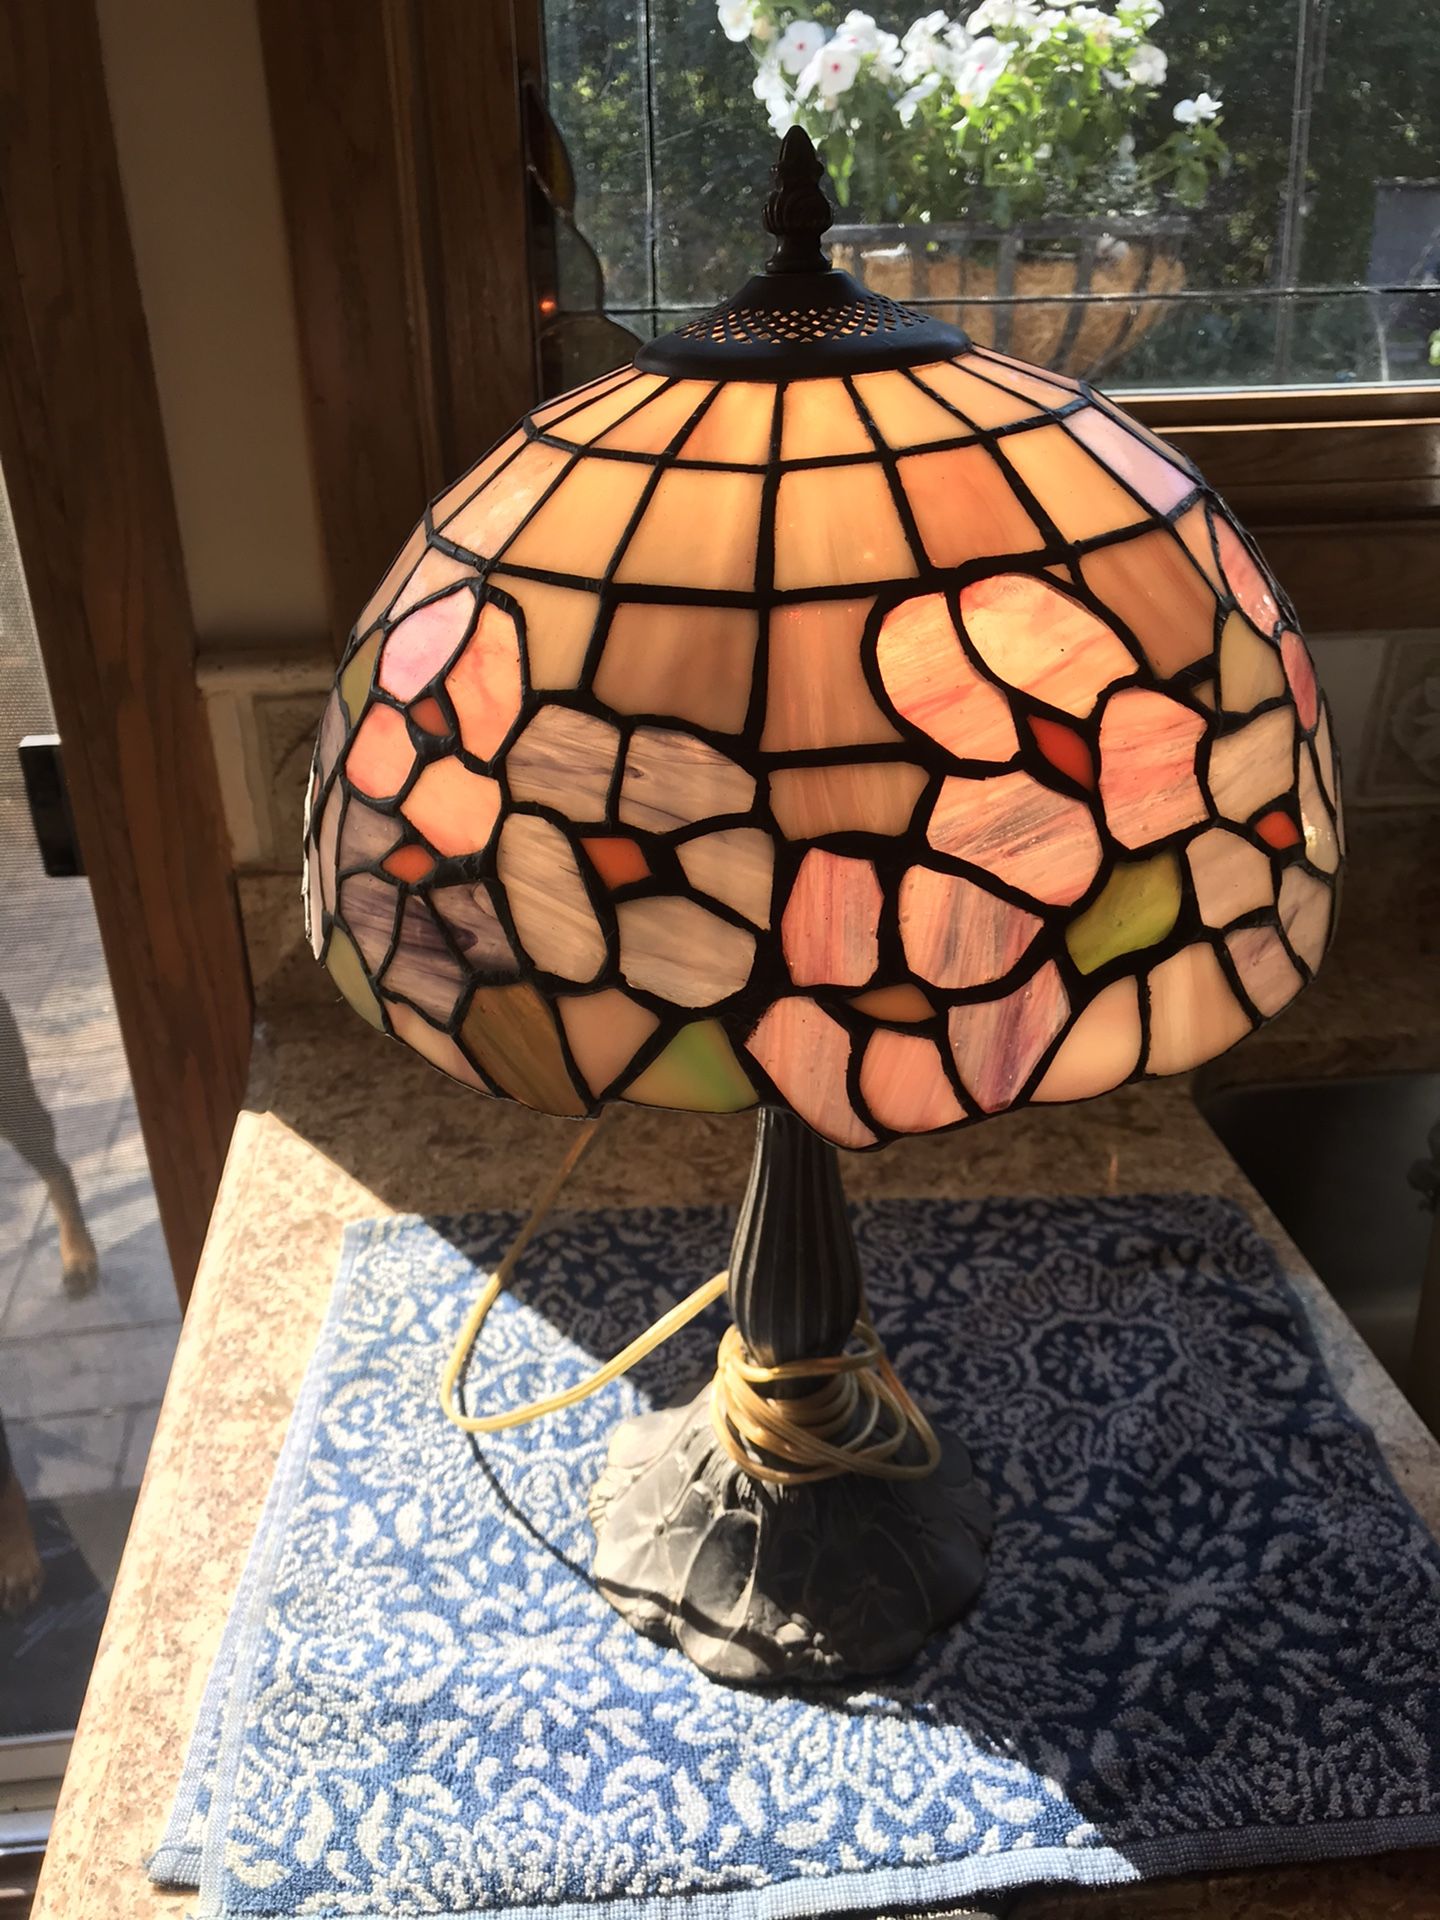 Stain glass lamp vintage